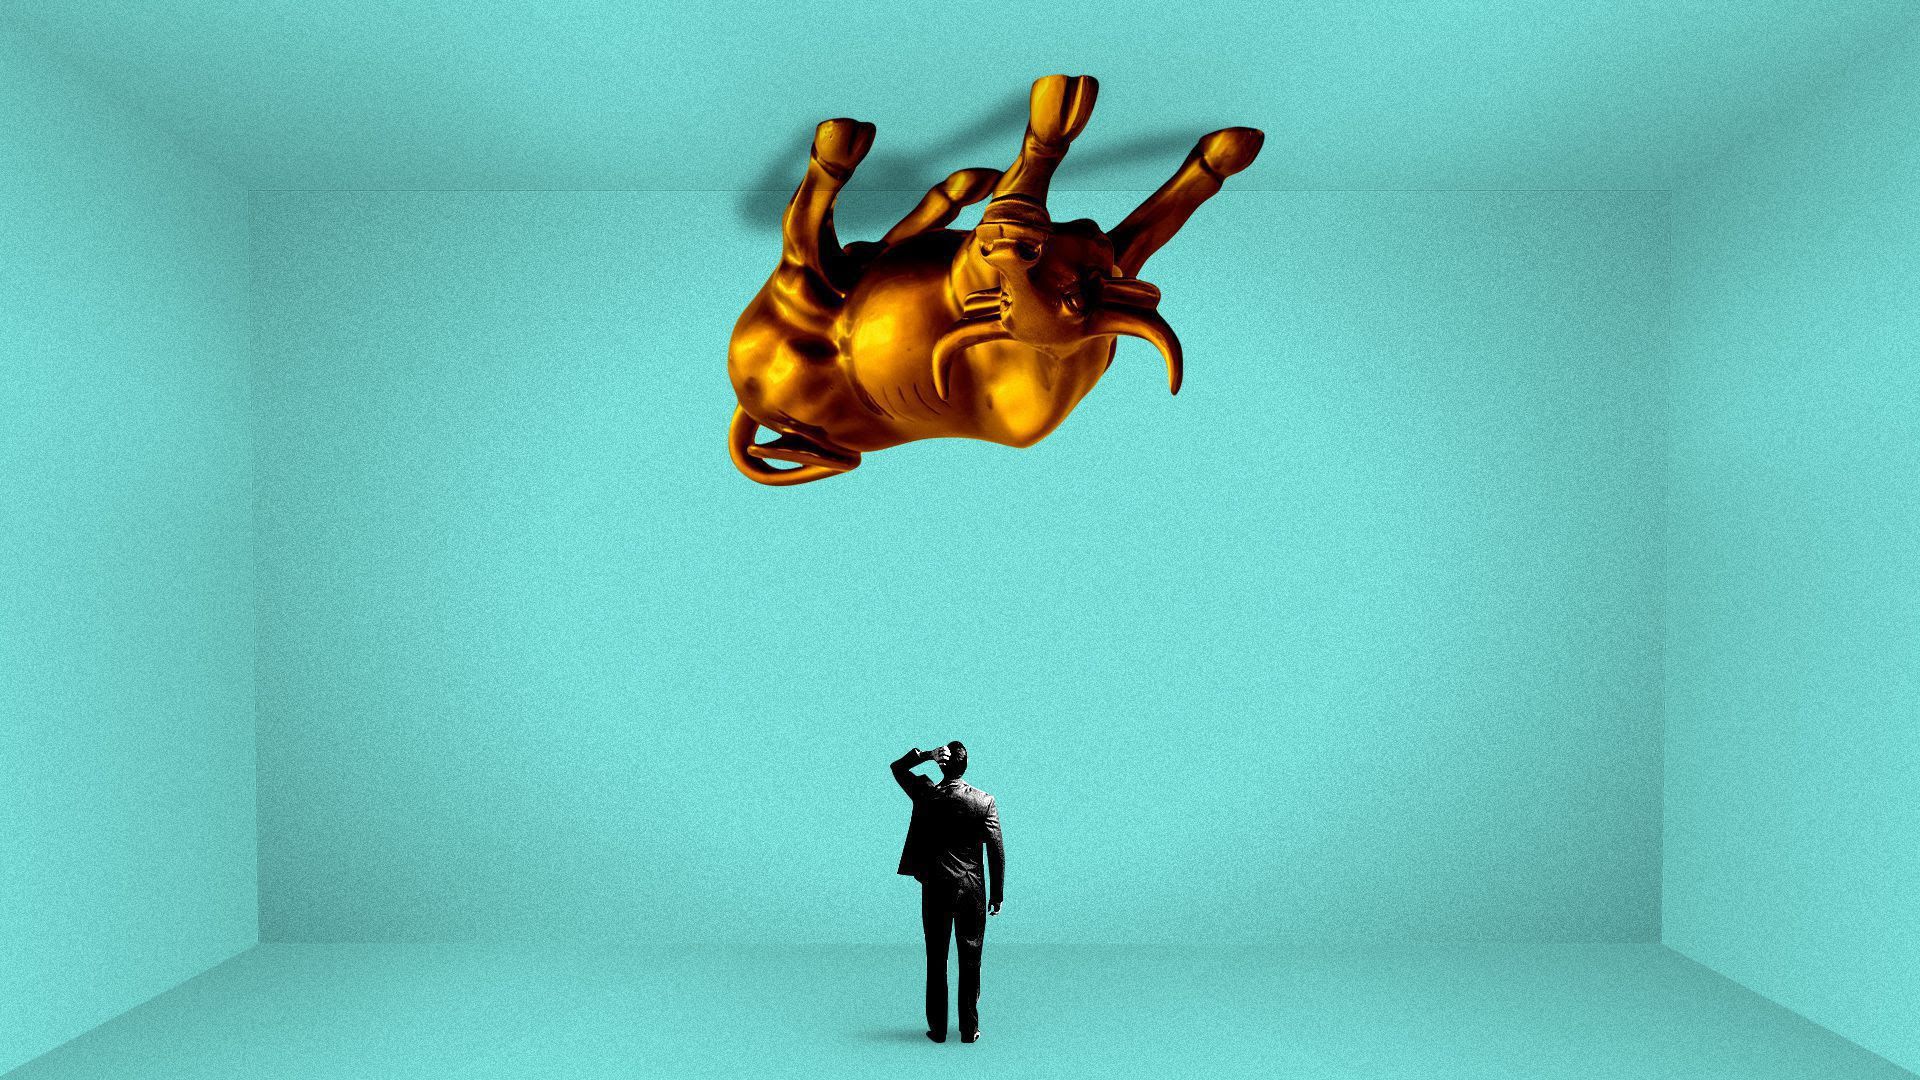 An illustration of a man staring at an upside-down steel bull